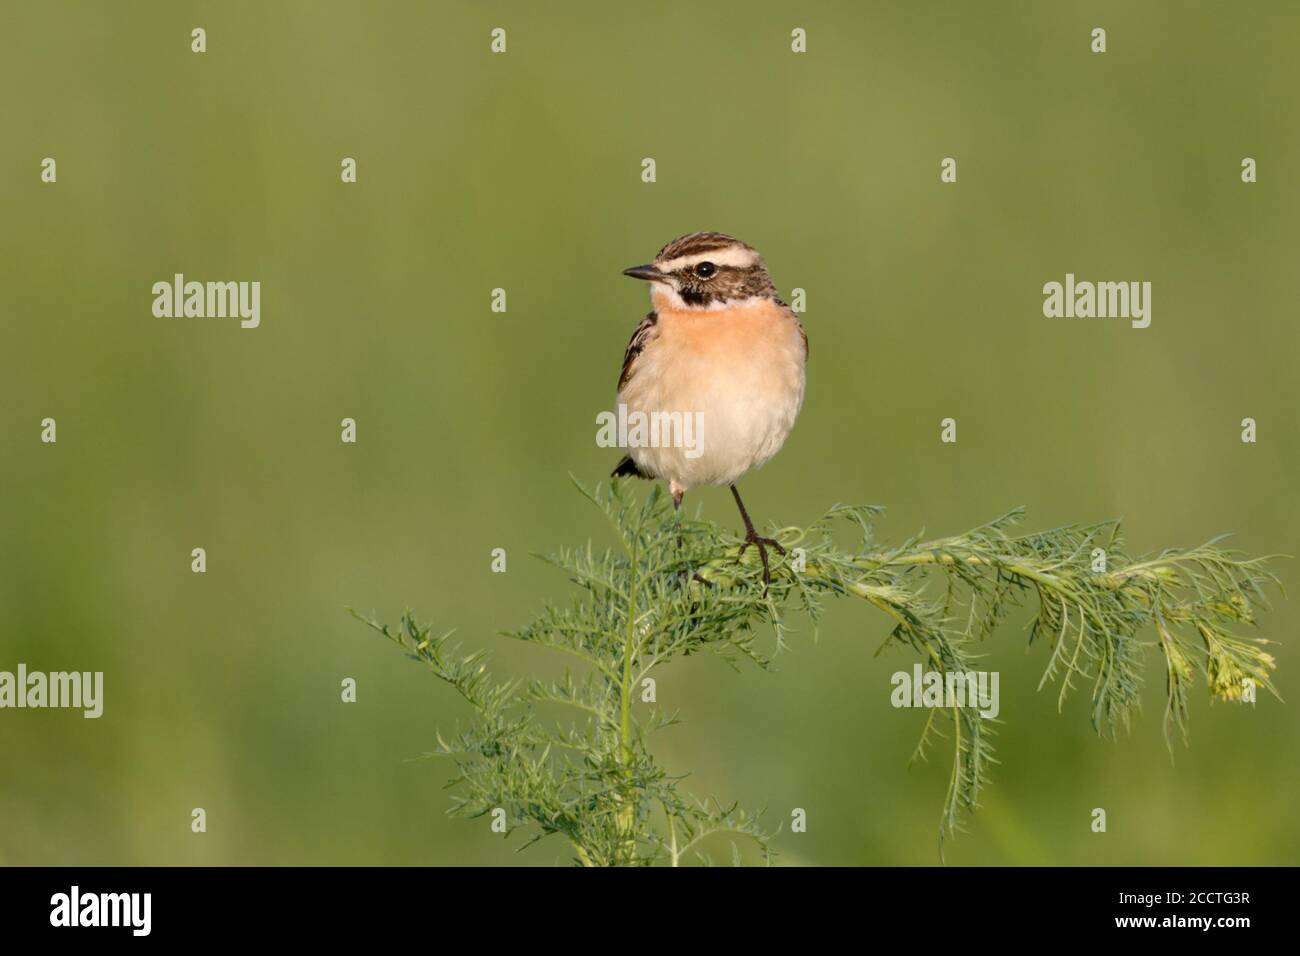 Whinchat ( Saxicola rubetra ) perched on a green twig, male in breeding dress, endangered native bird of open grassland, wildlife, Europe. Stock Photo